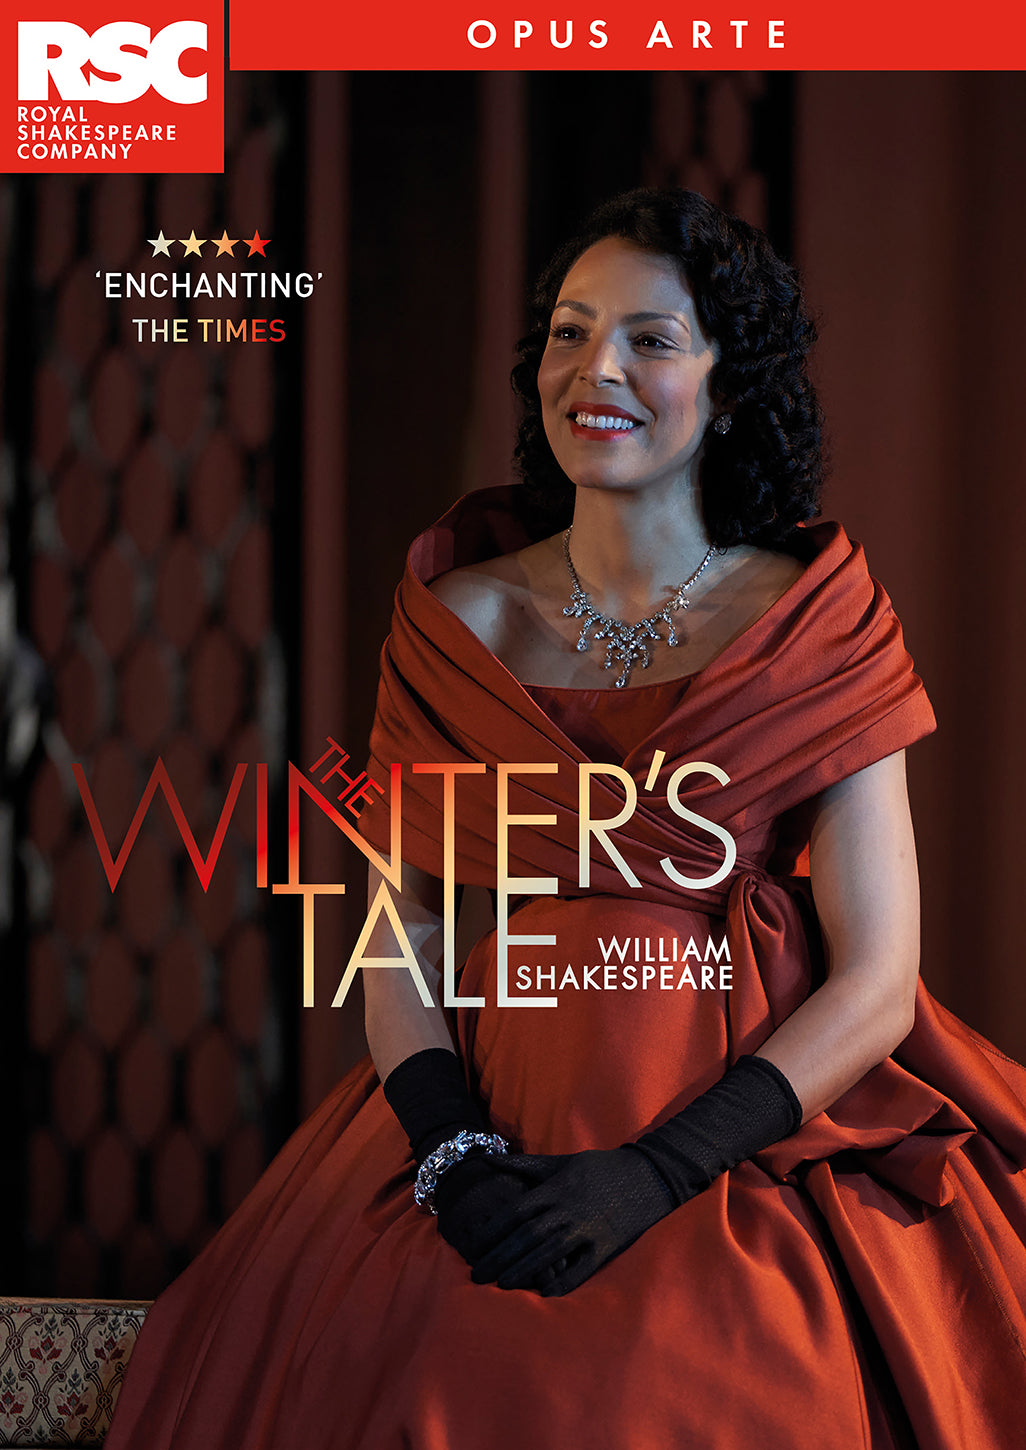 Shakespeare: The Winter's Tale